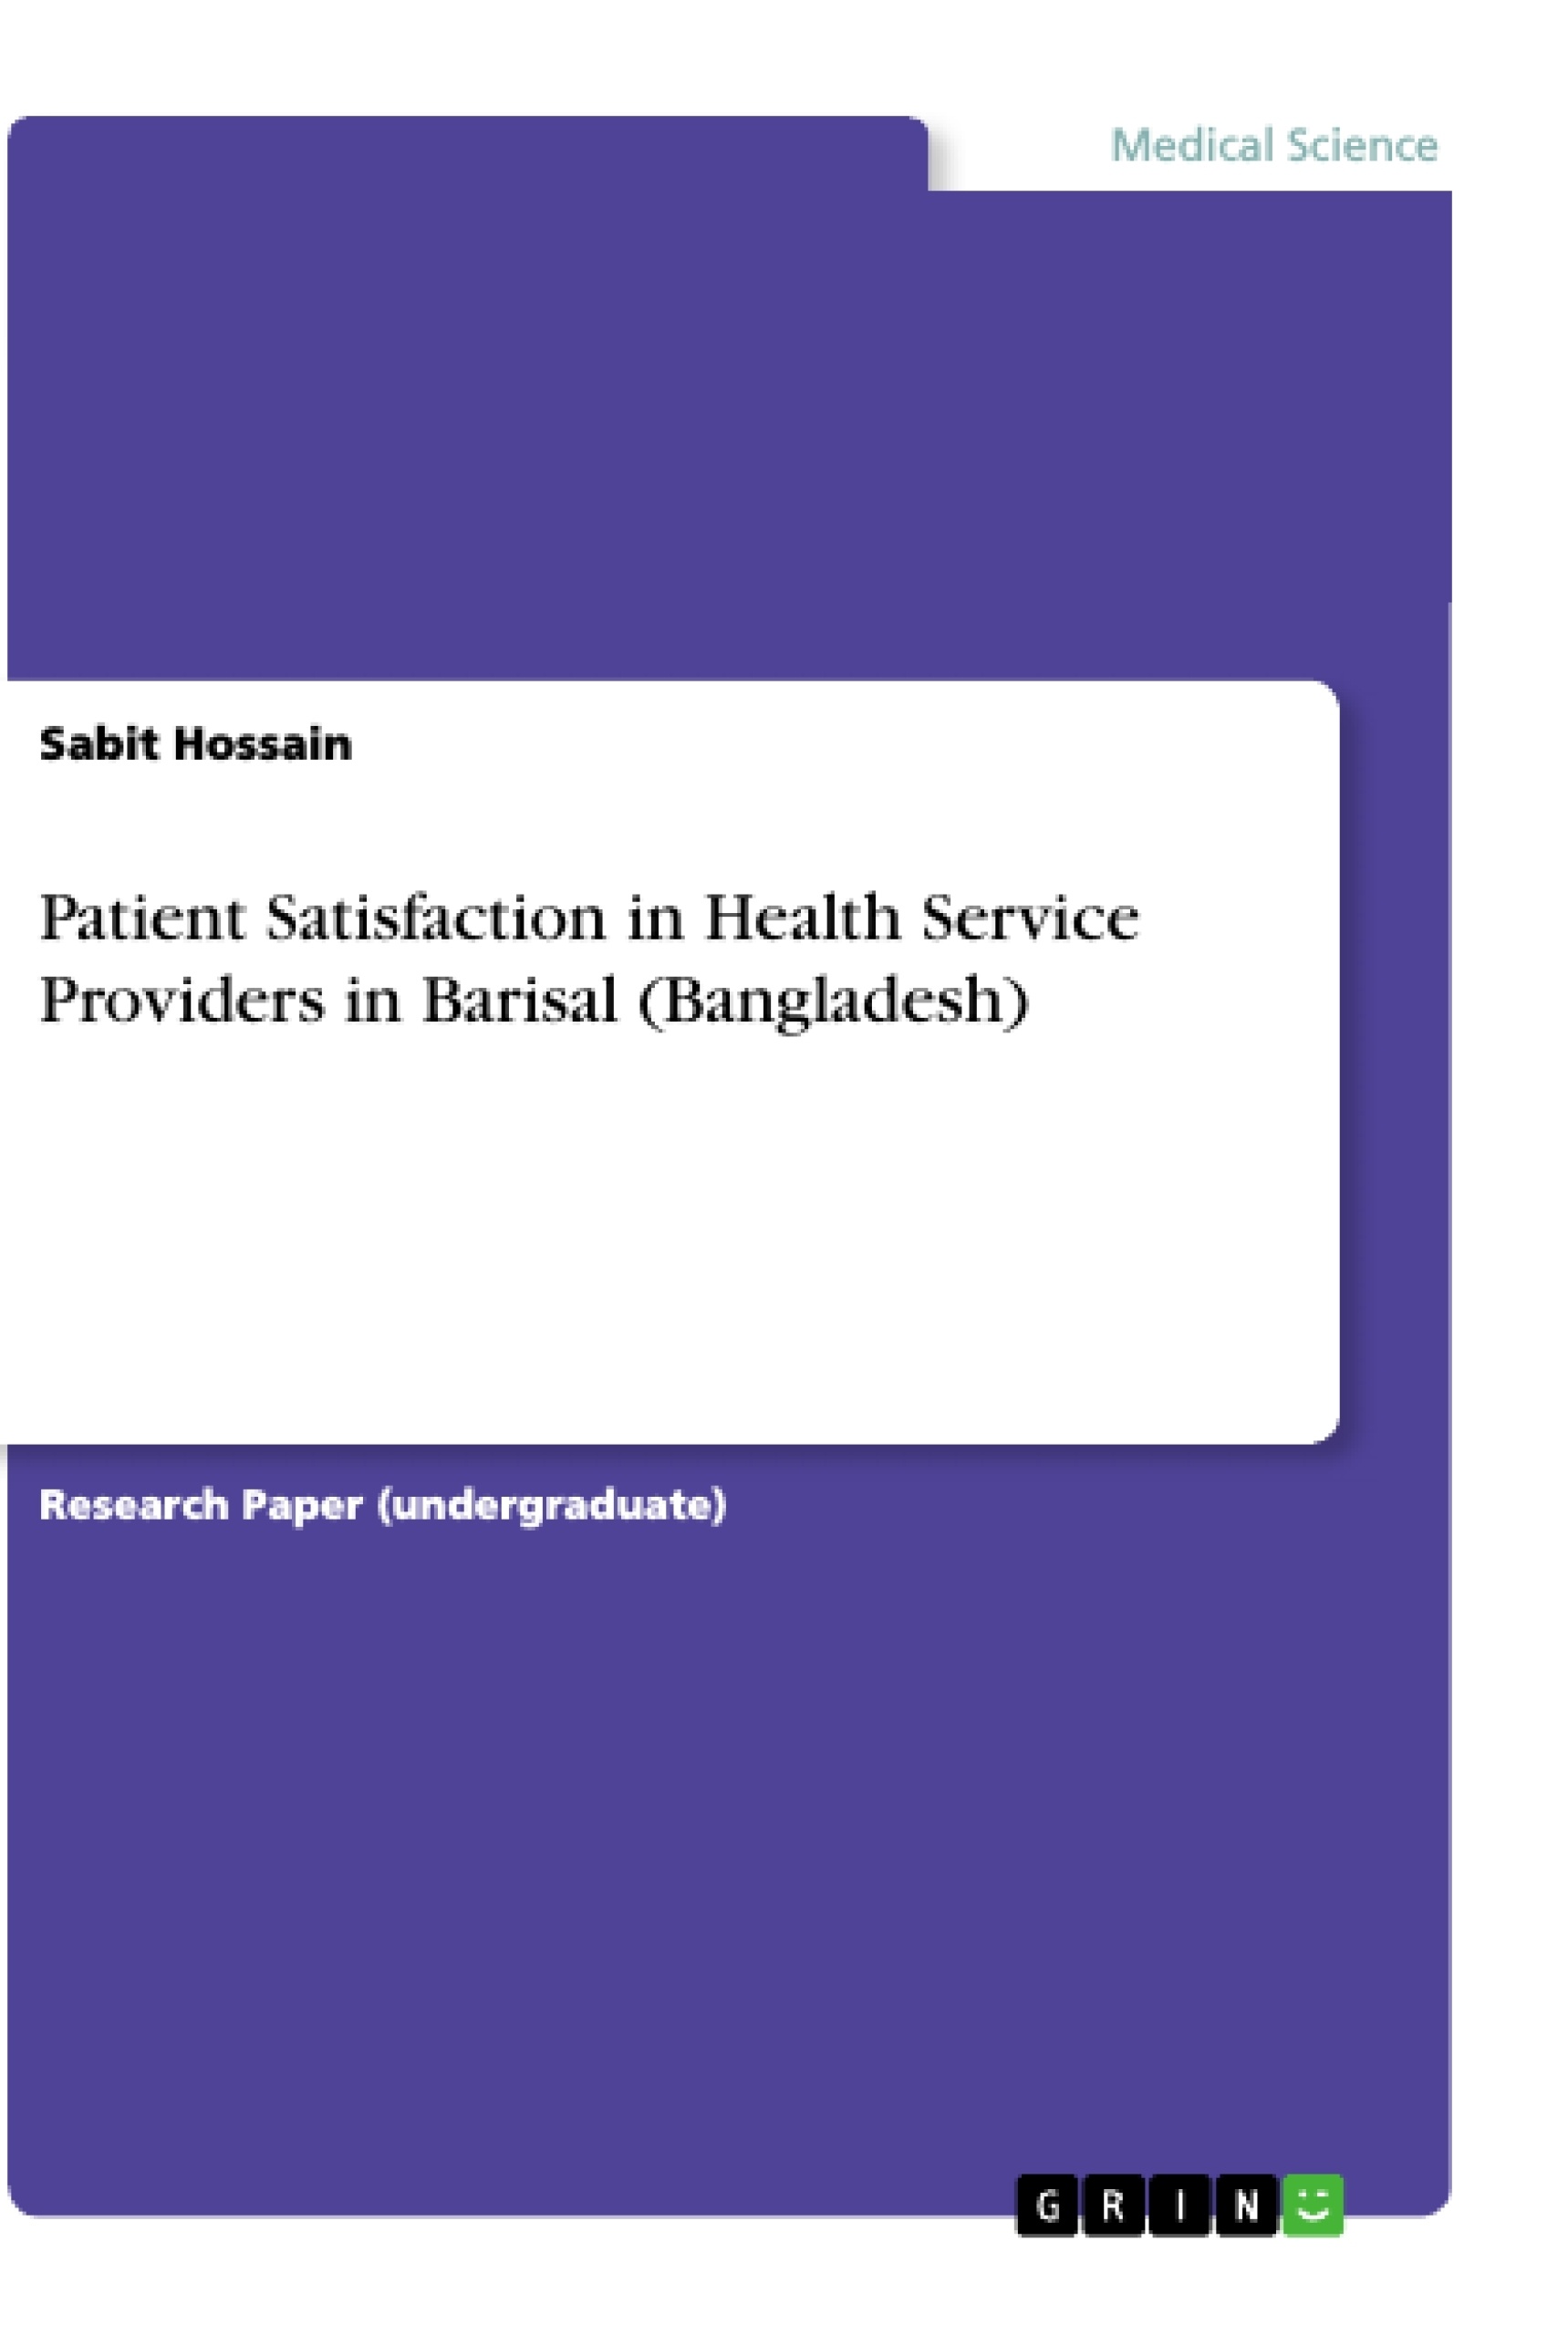 Title: Patient Satisfaction in Health Service Providers in Barisal (Bangladesh)